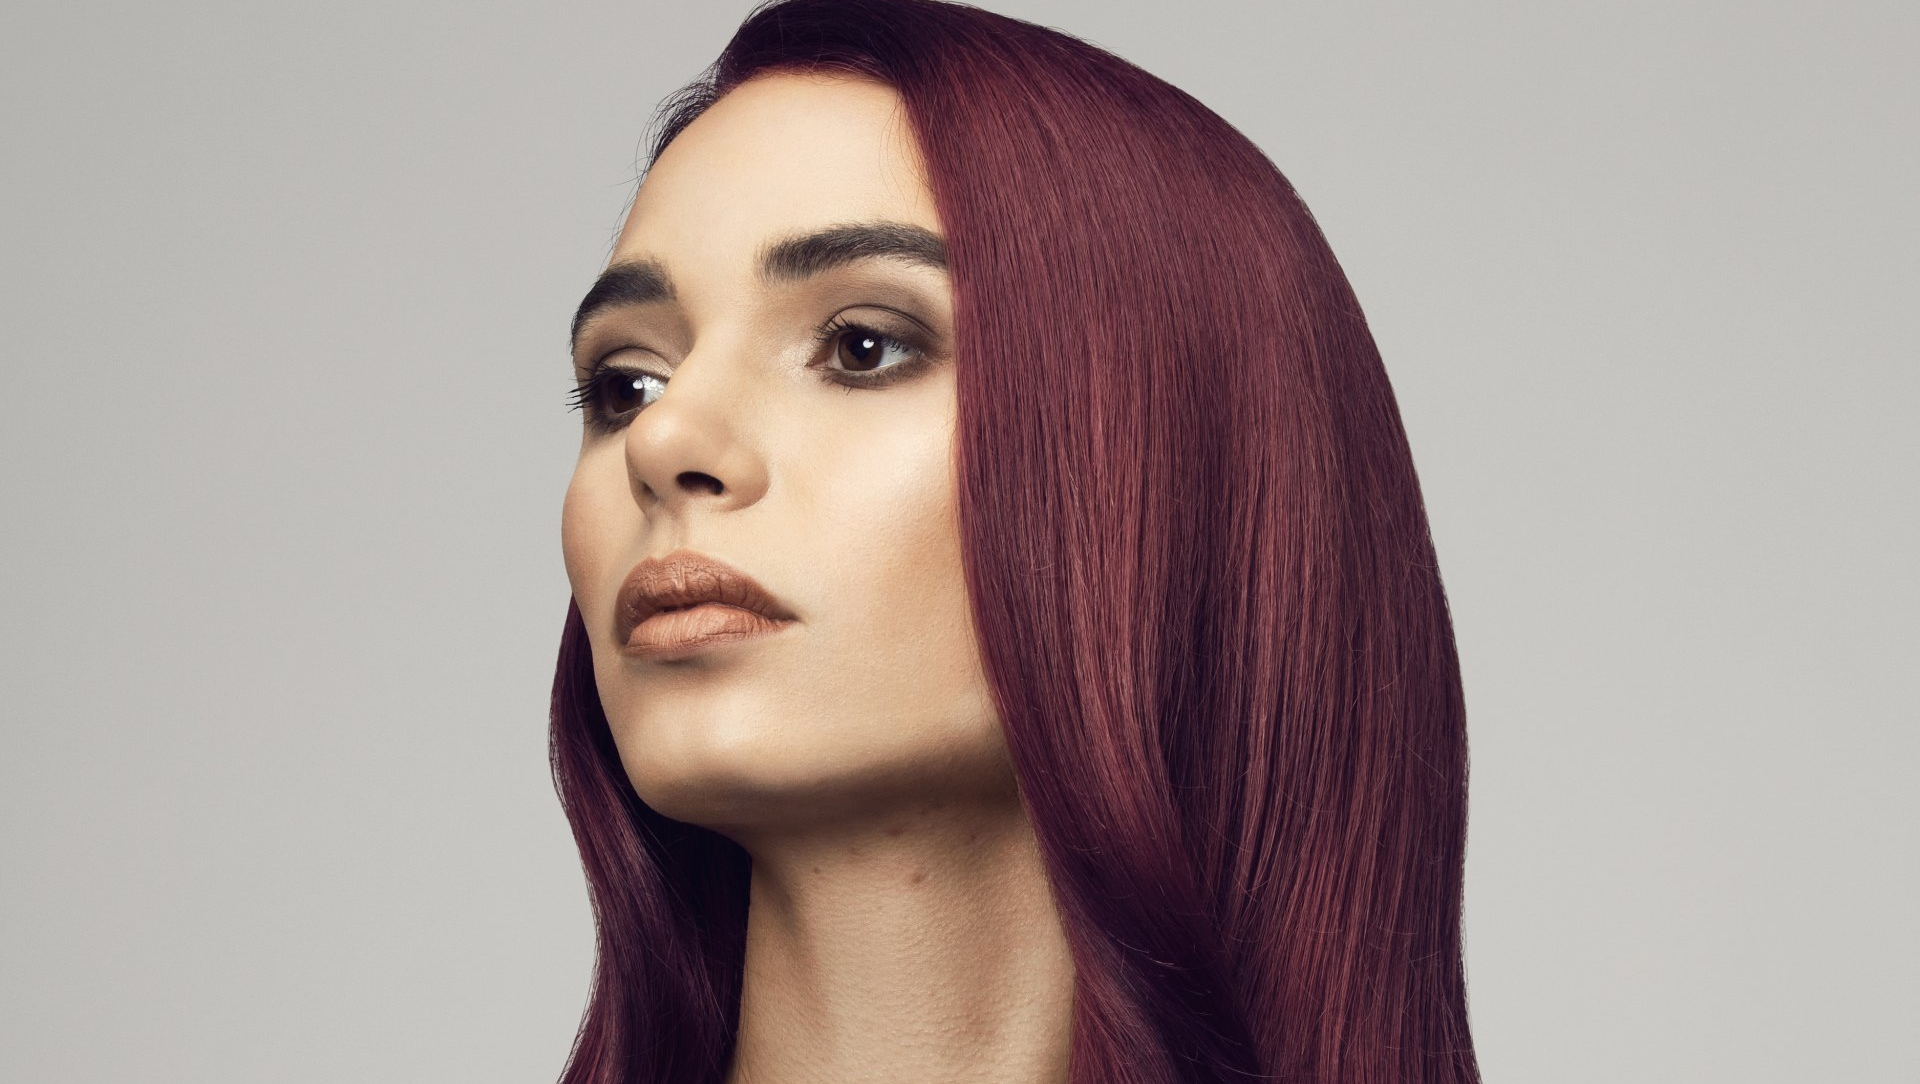 GET THE LOOK: HOW TO ACHIEVE THE PERFECT HAIR COLOUR